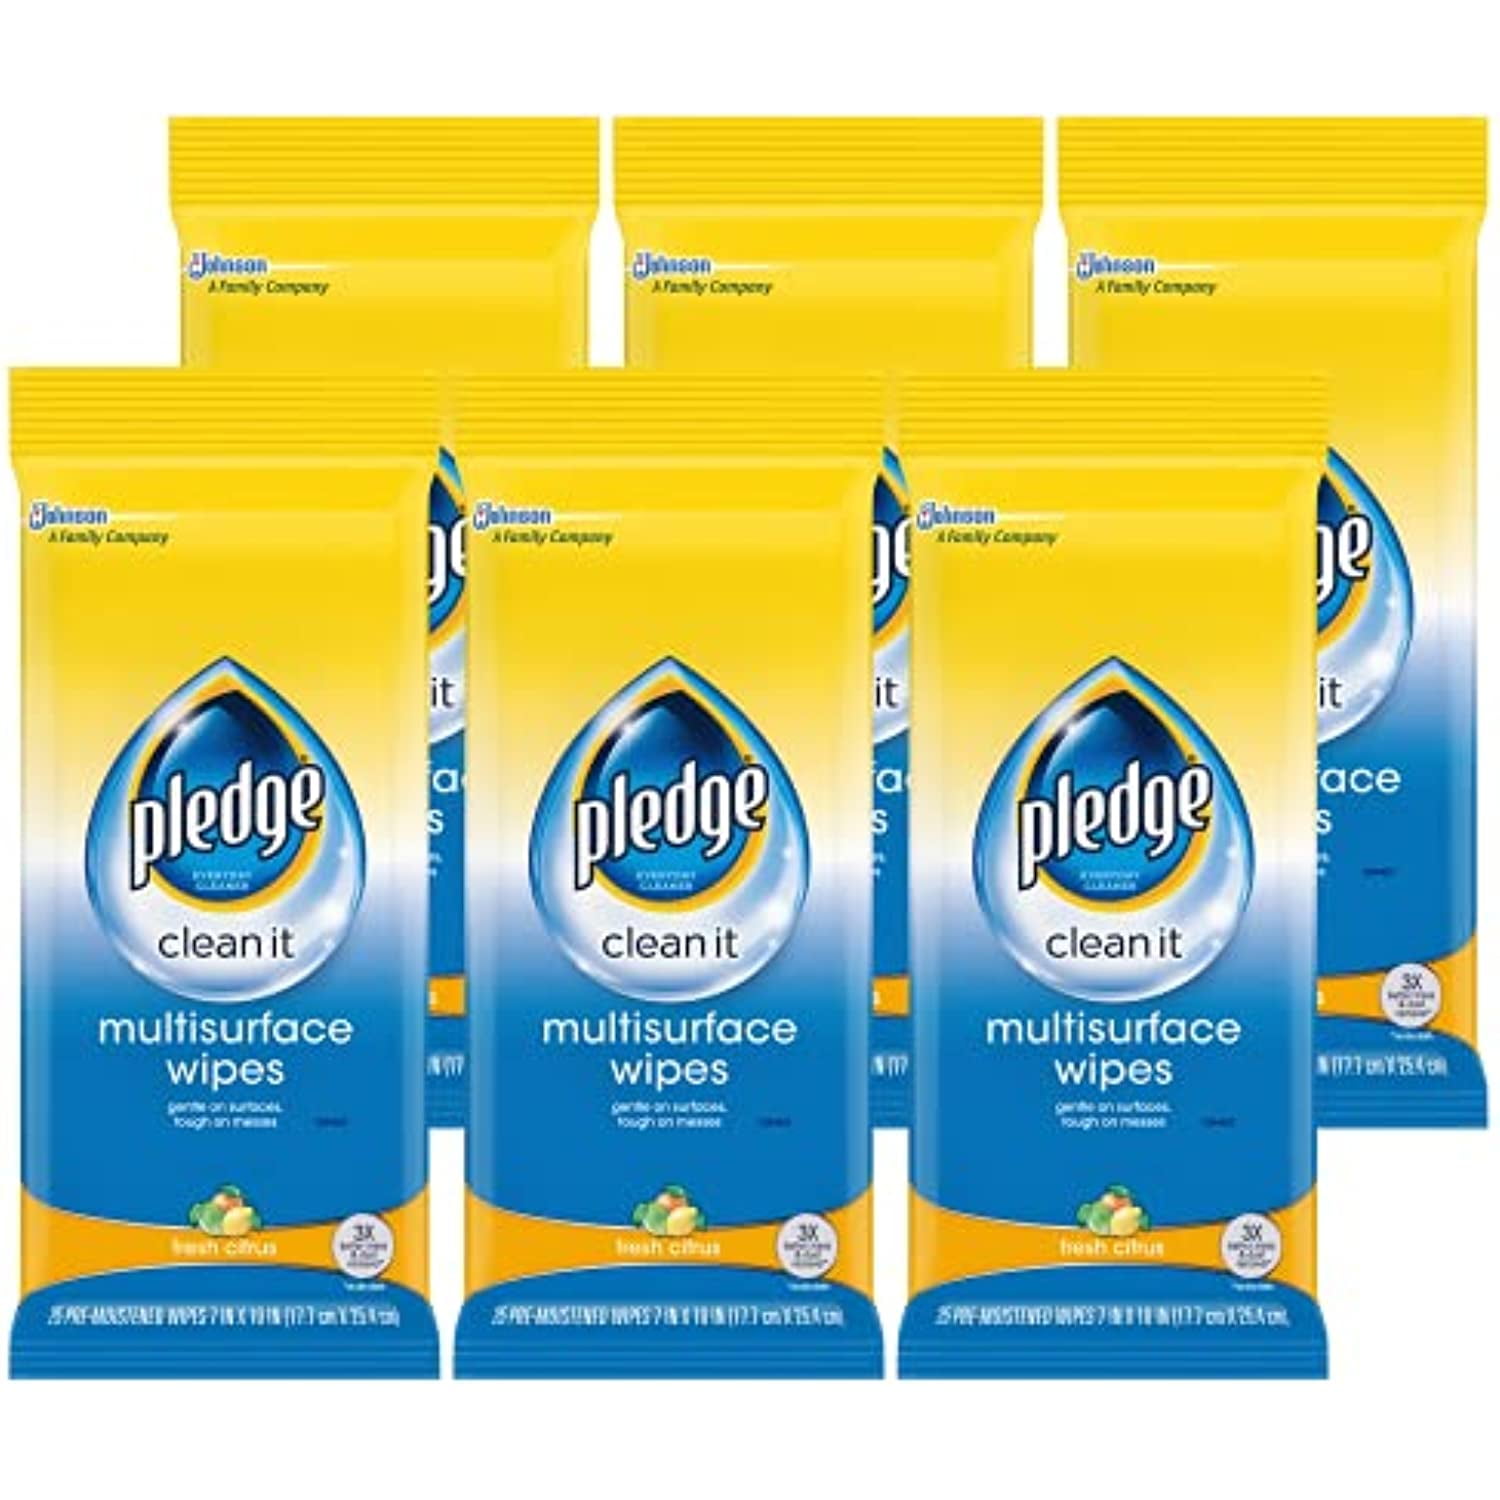 Pledge Everyday Clean Multisurface Wipes, Fresh Citrus, 25 Wipes, 3 Count  Pack (75 Wipes Total)